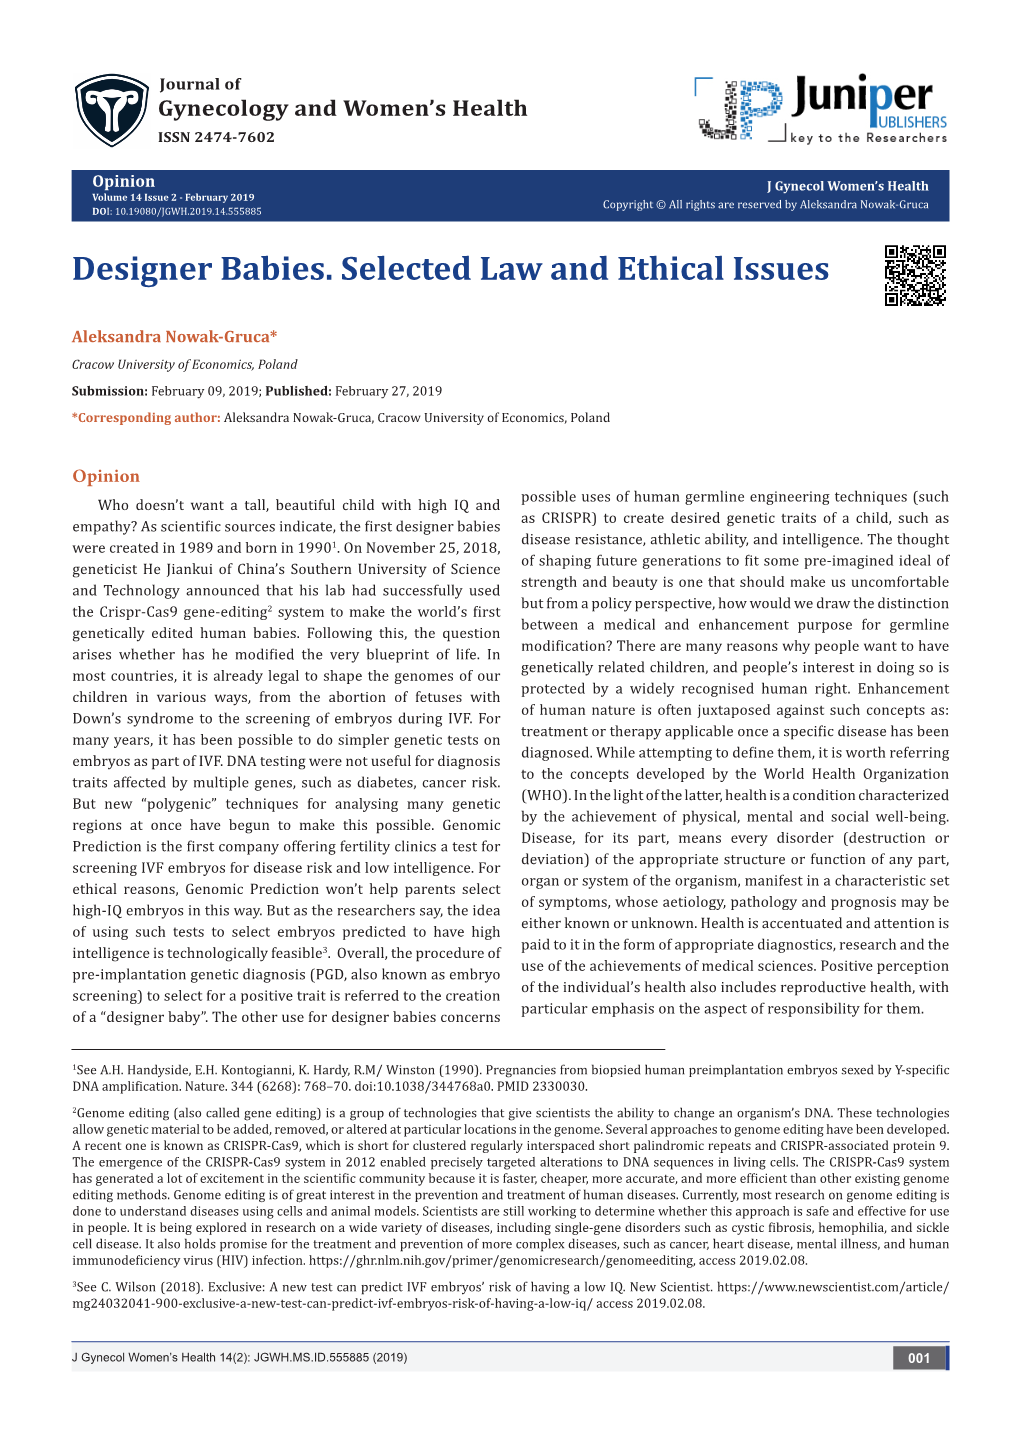 Designer Babies. Selected Law and Ethical Issues